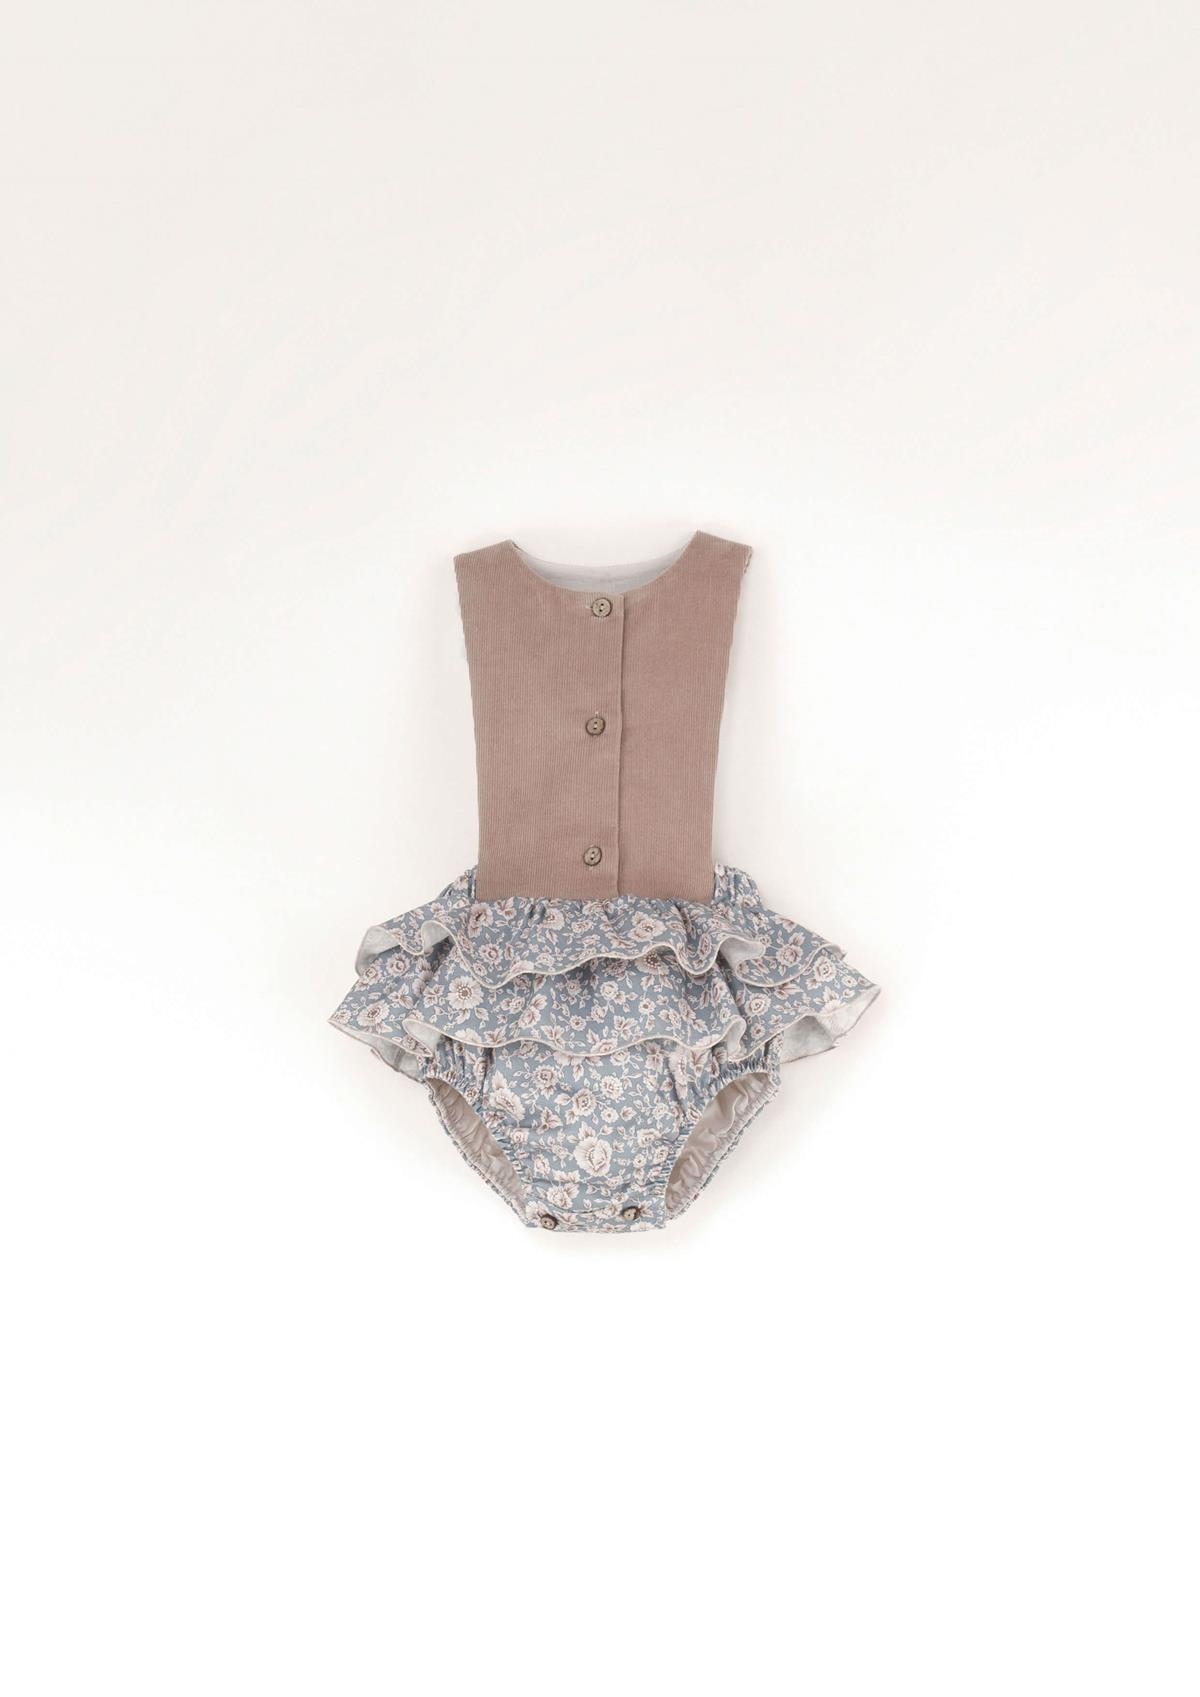 Mod.3.1 Blue floral print romper suit with bib and frill | AW23.24 Mod.3.1 Blue floral print romper suit with bib and frill